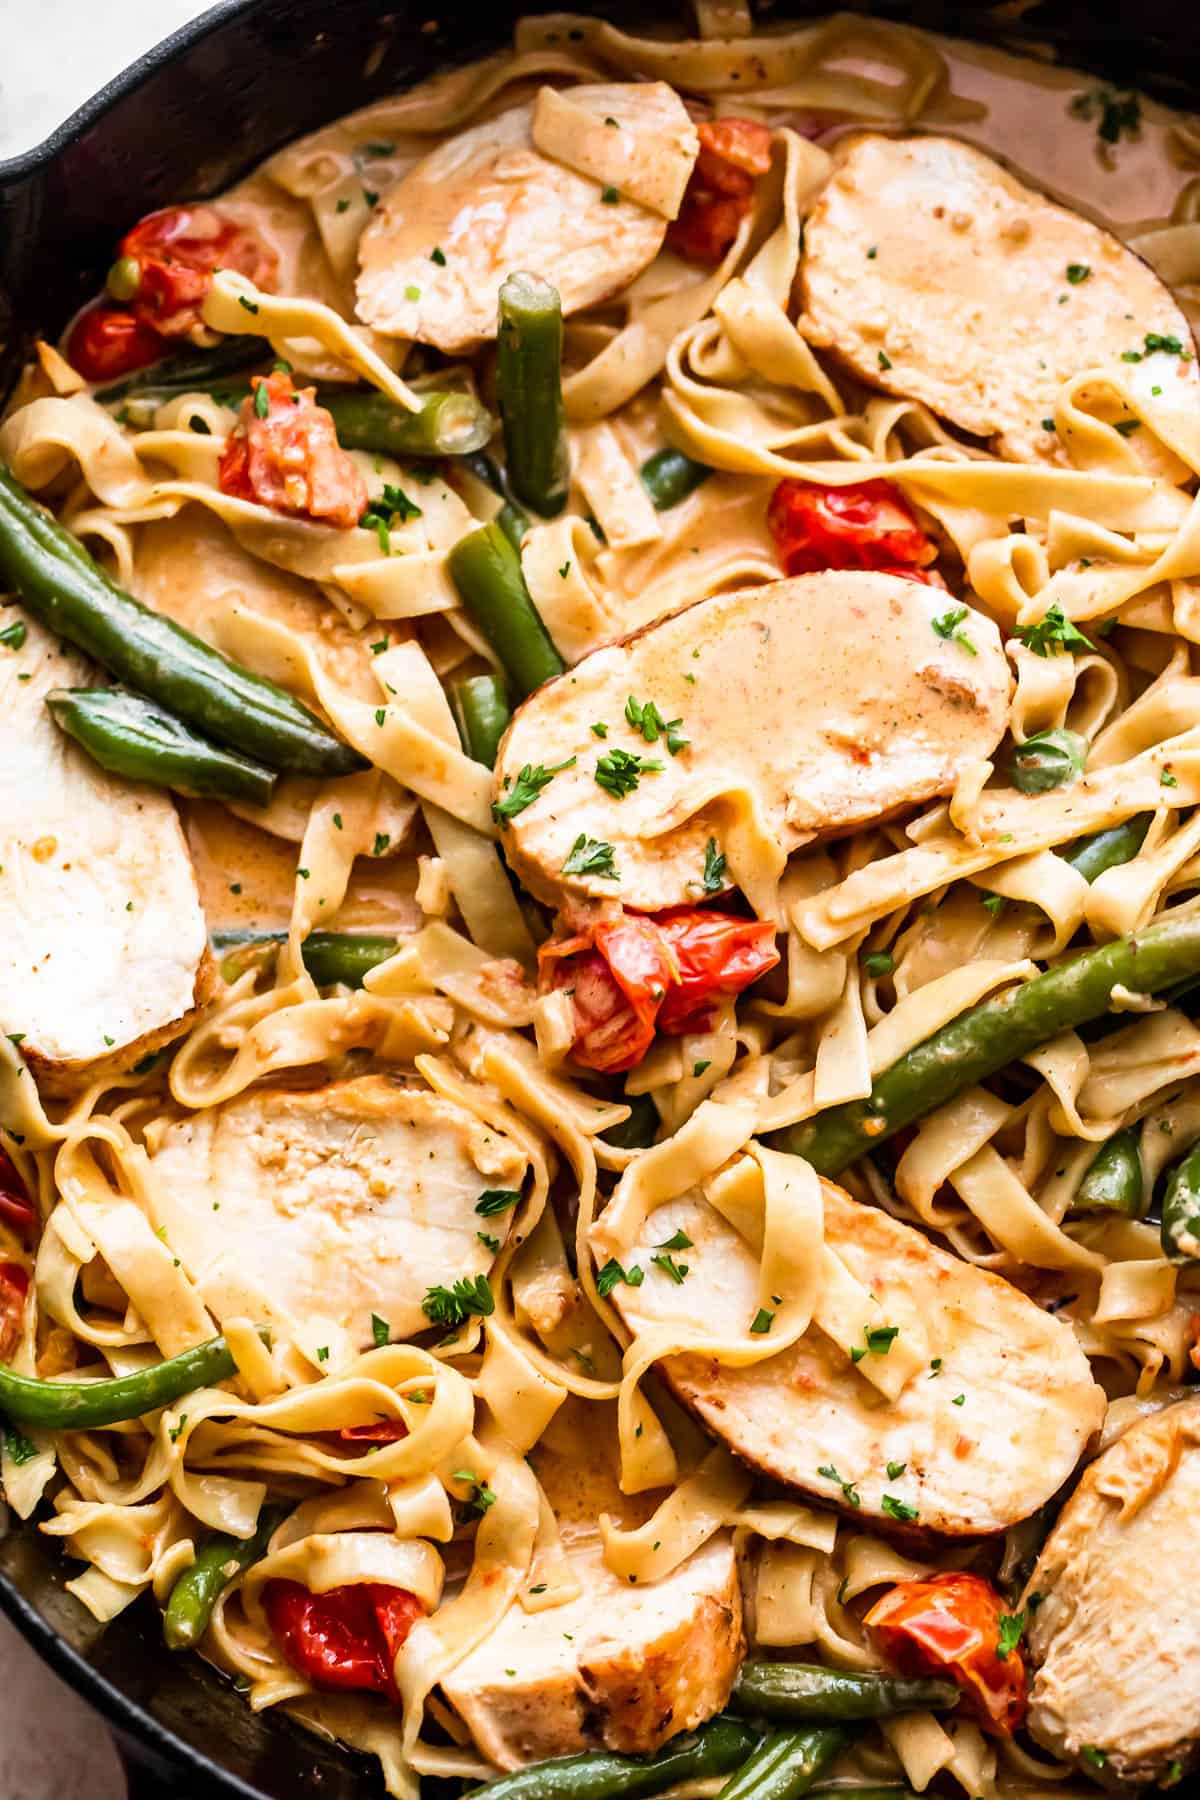 fettuccine pasta in creamy sauce with slices of blackened chicken, tomatoes, and green beans